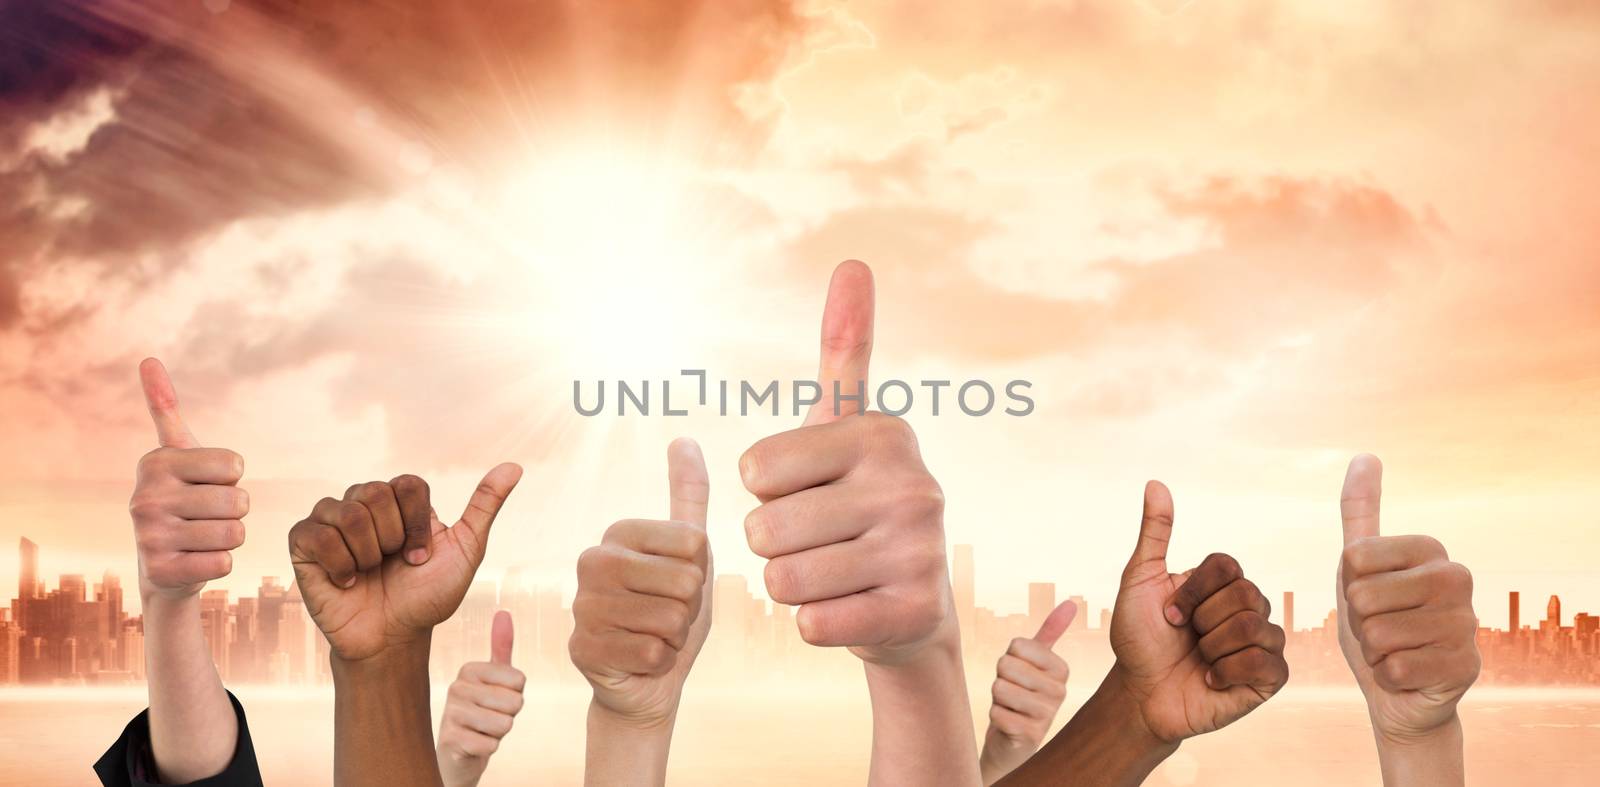 Hands showing thumbs up against sun shining over city